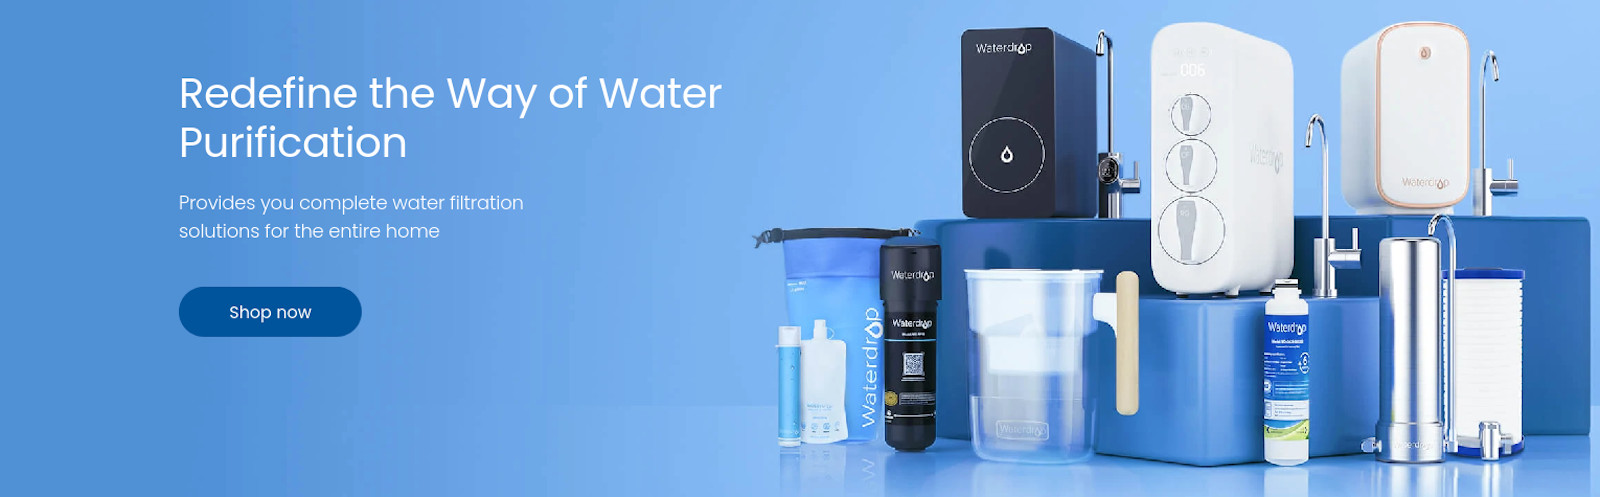 On Sale water purification products